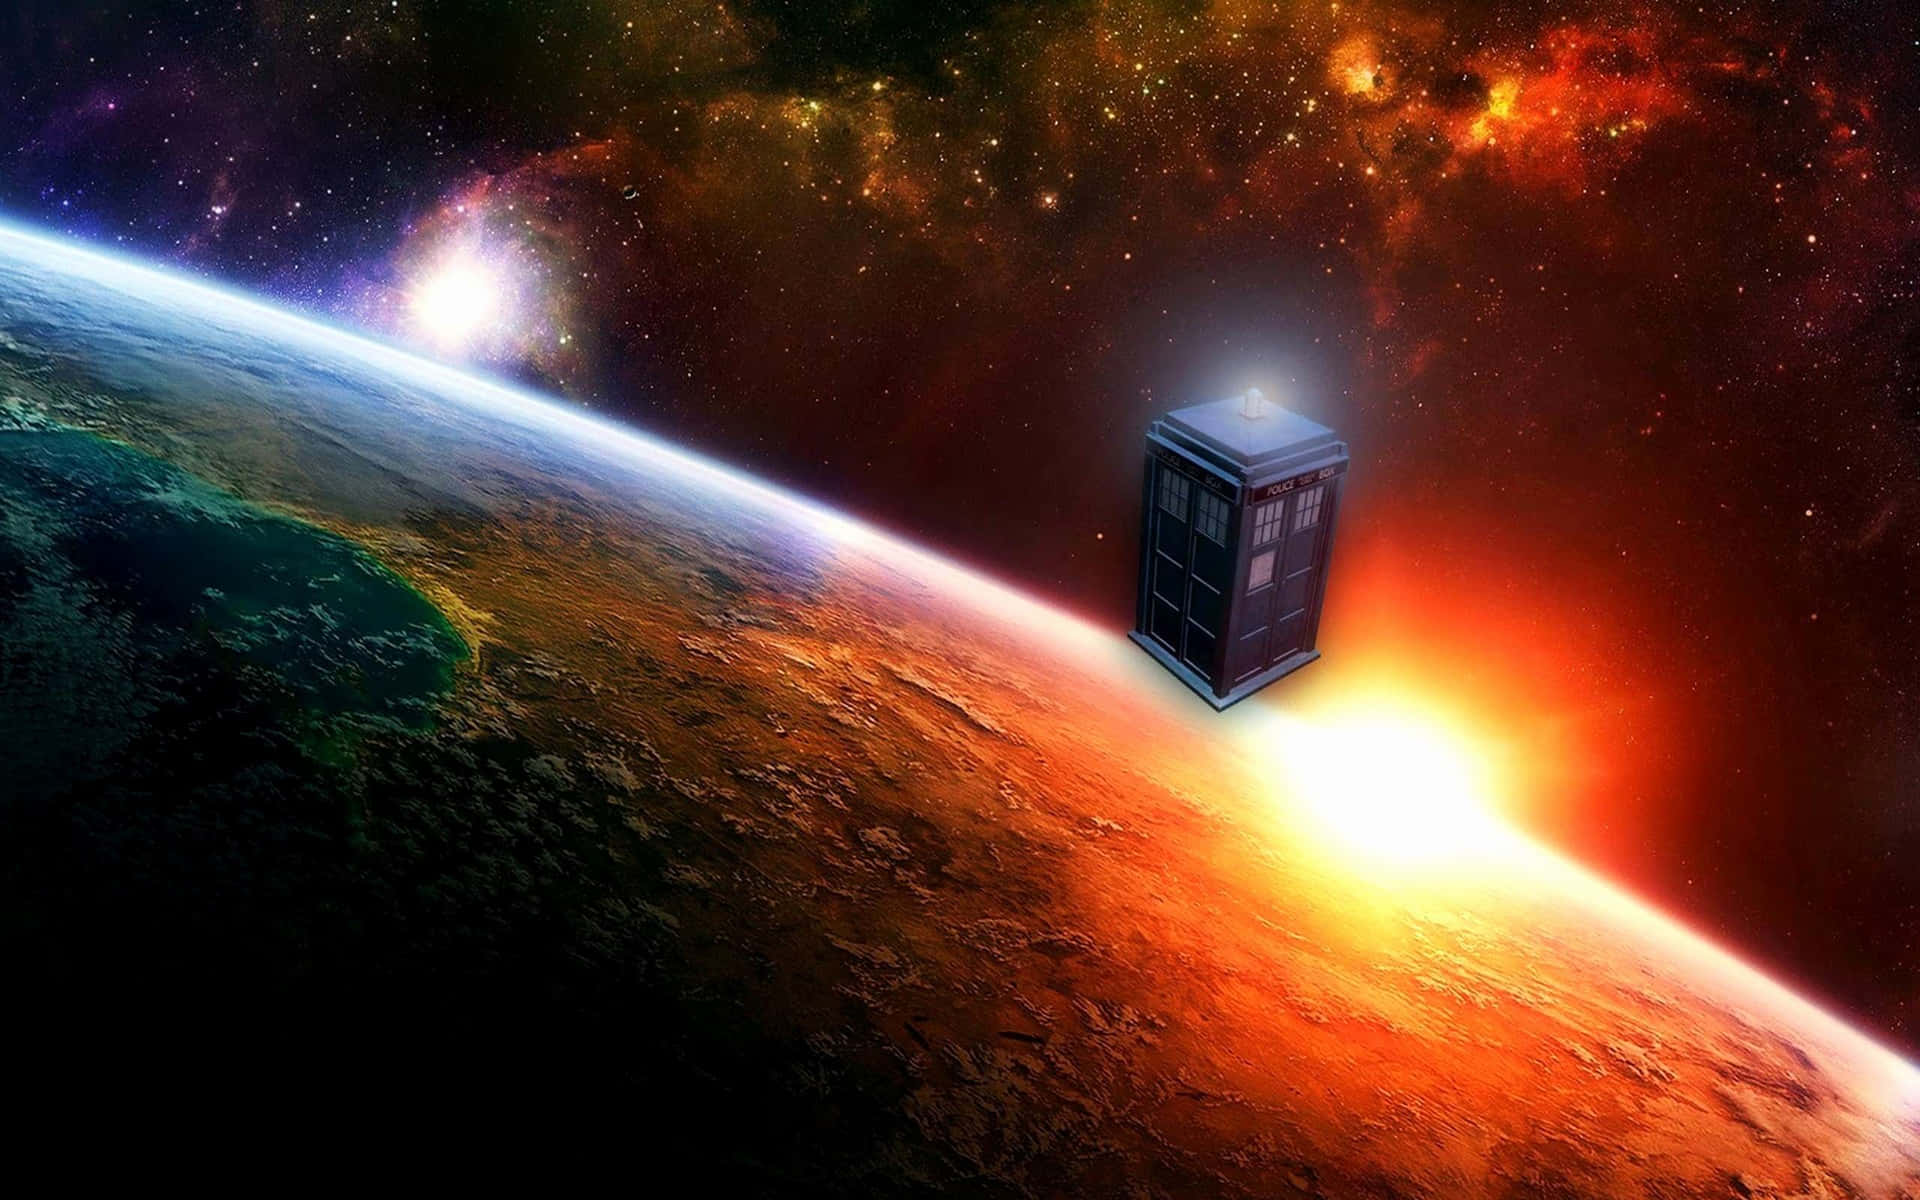 Explore the universe in style with the iconic TARDIS Wallpaper